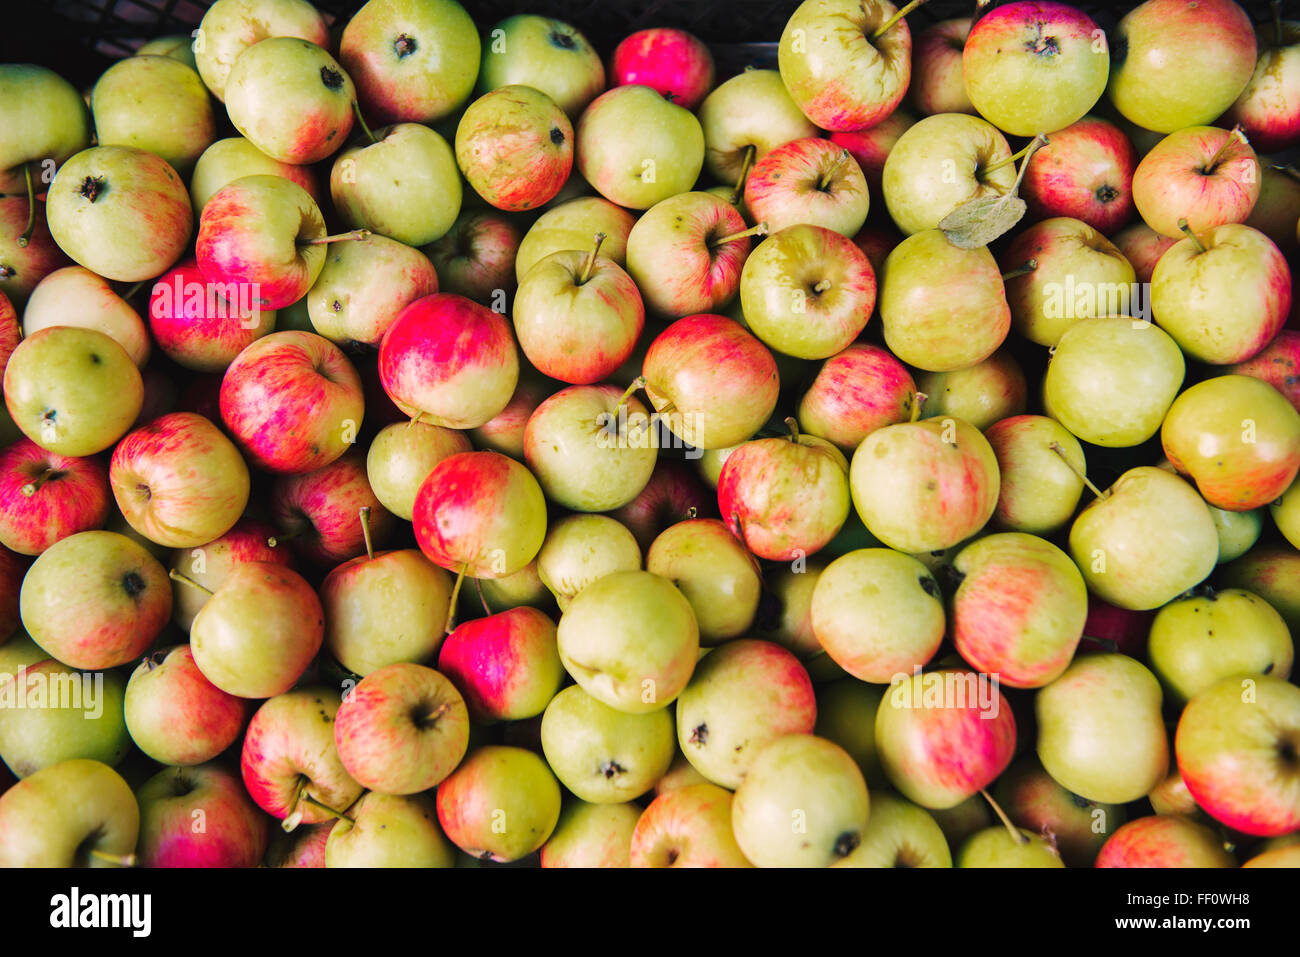 Close up of pile of apples Stock Photo